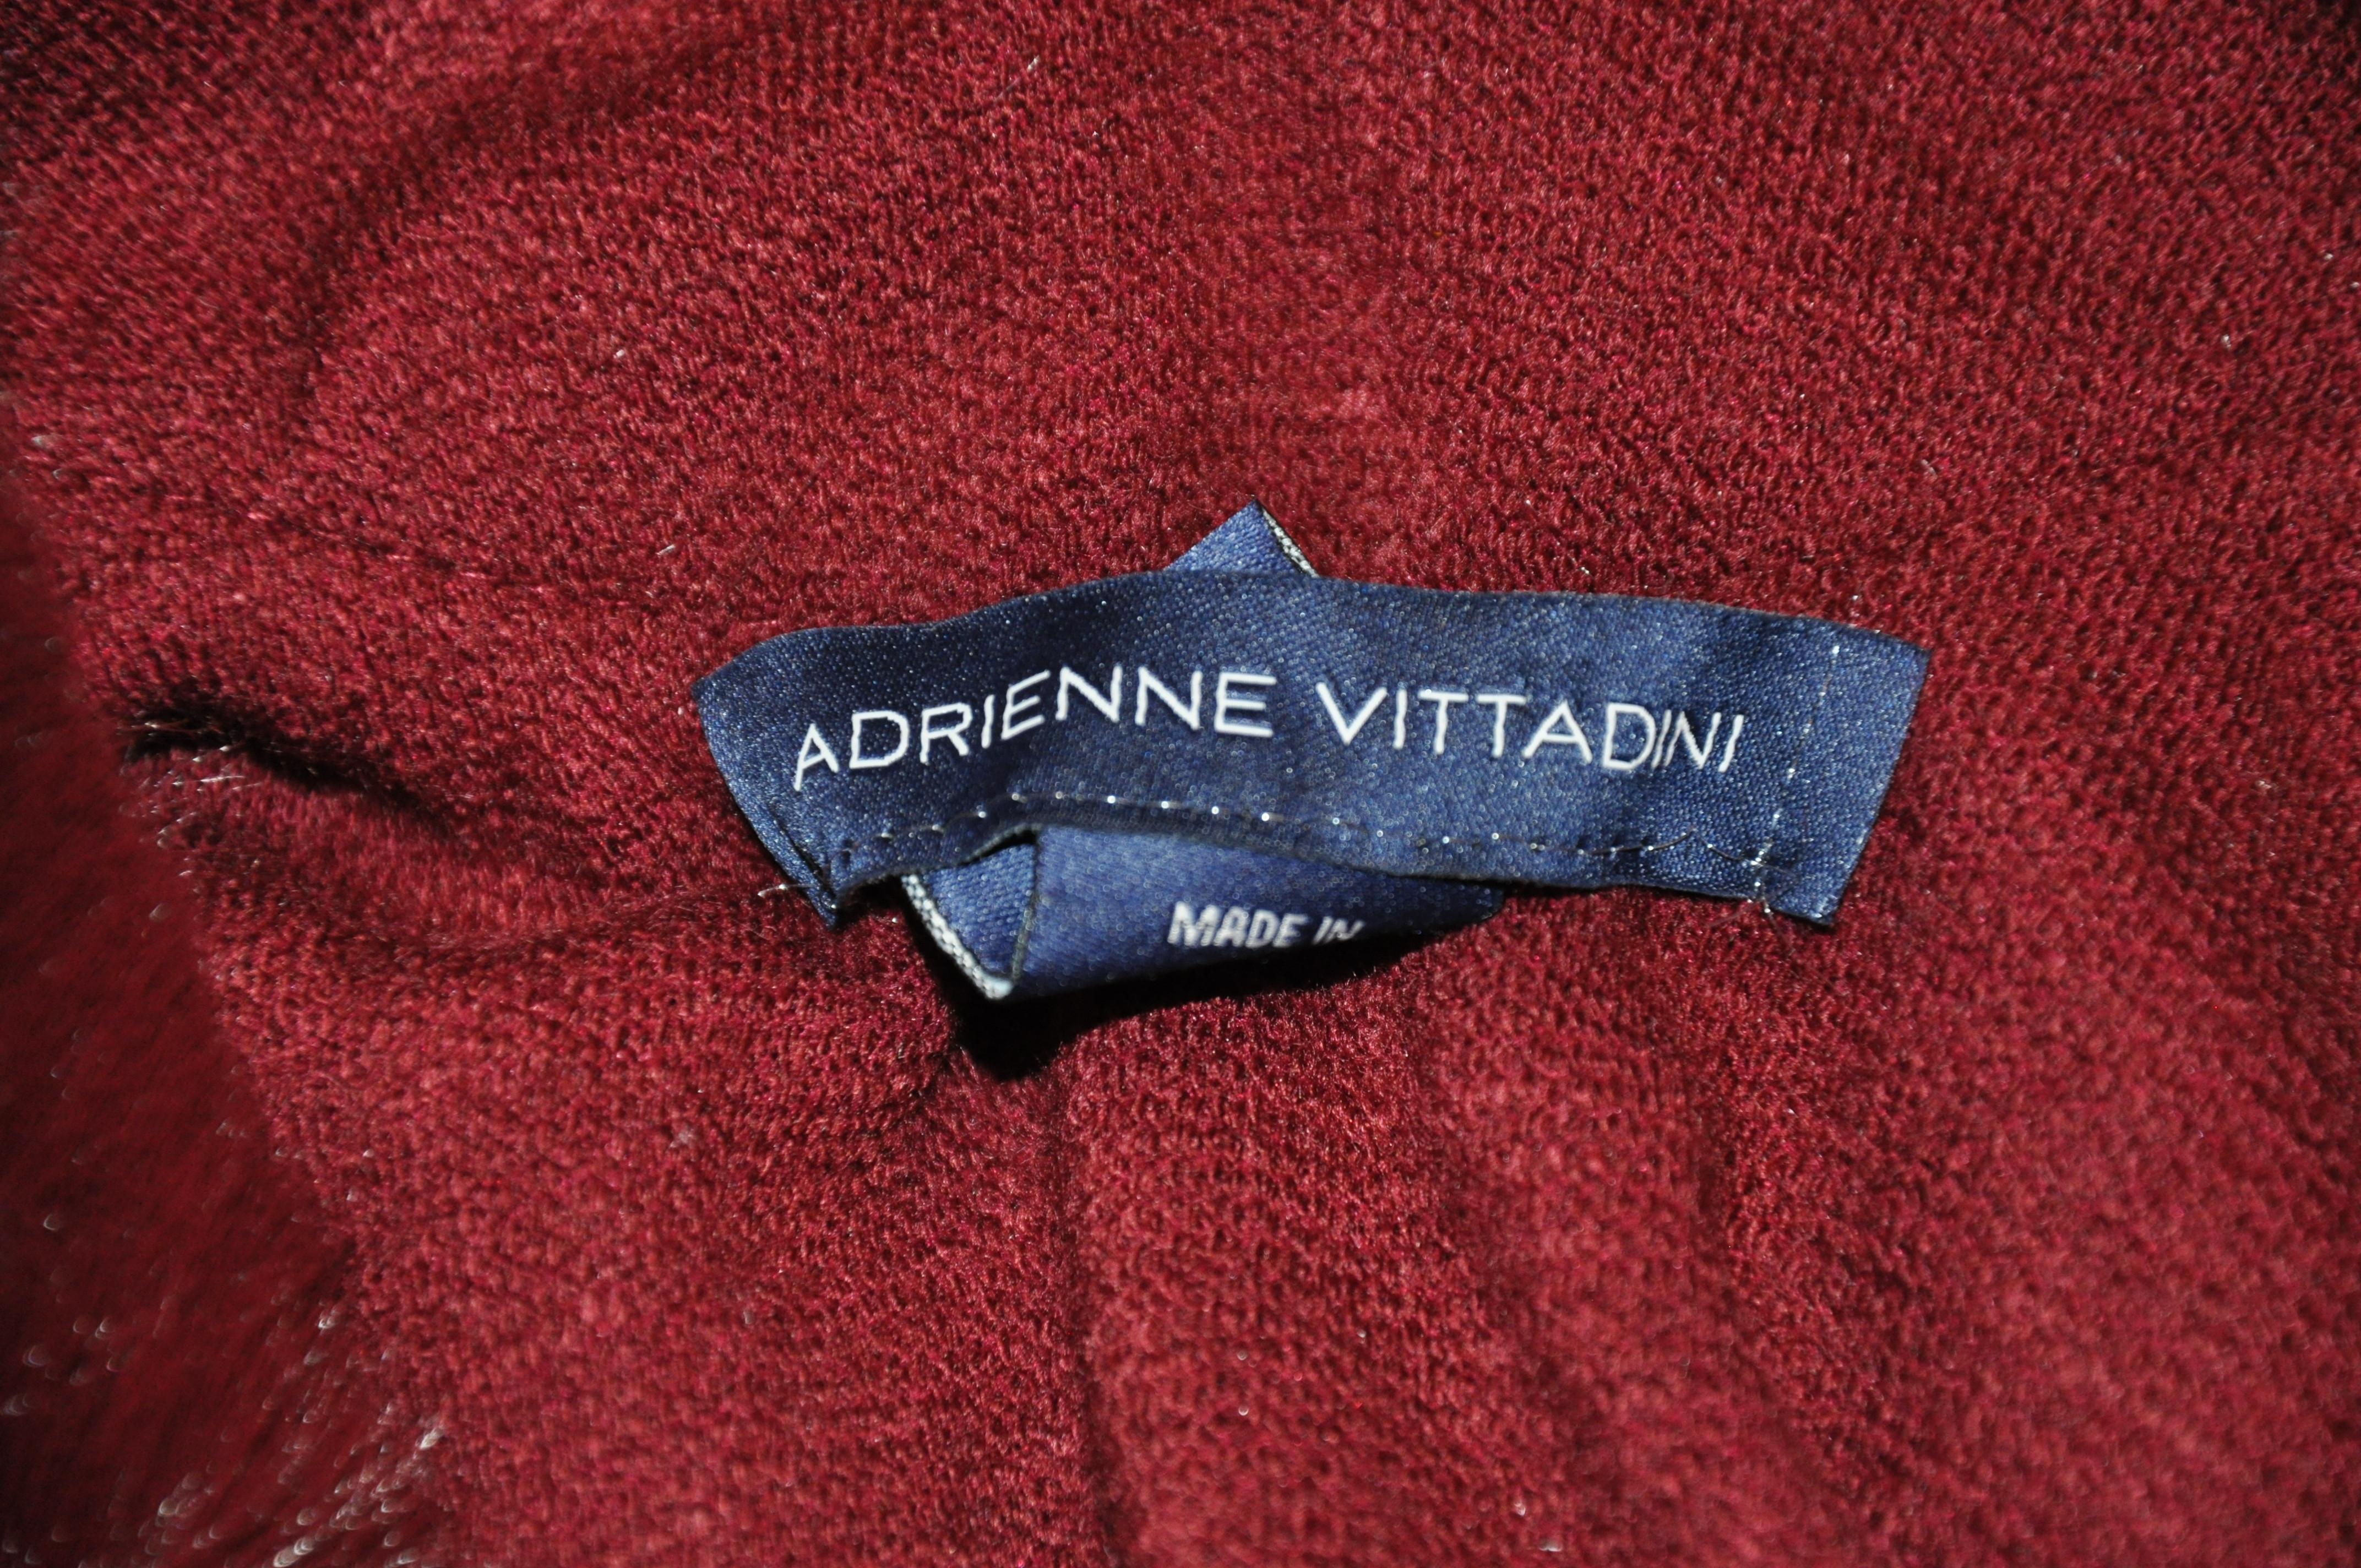     Adrienne Vittadini luxurious rich deep burgundy evening poncho accented with faux fur measures 33 in total length. The total width across measures 42 inches. The front has a hidden 